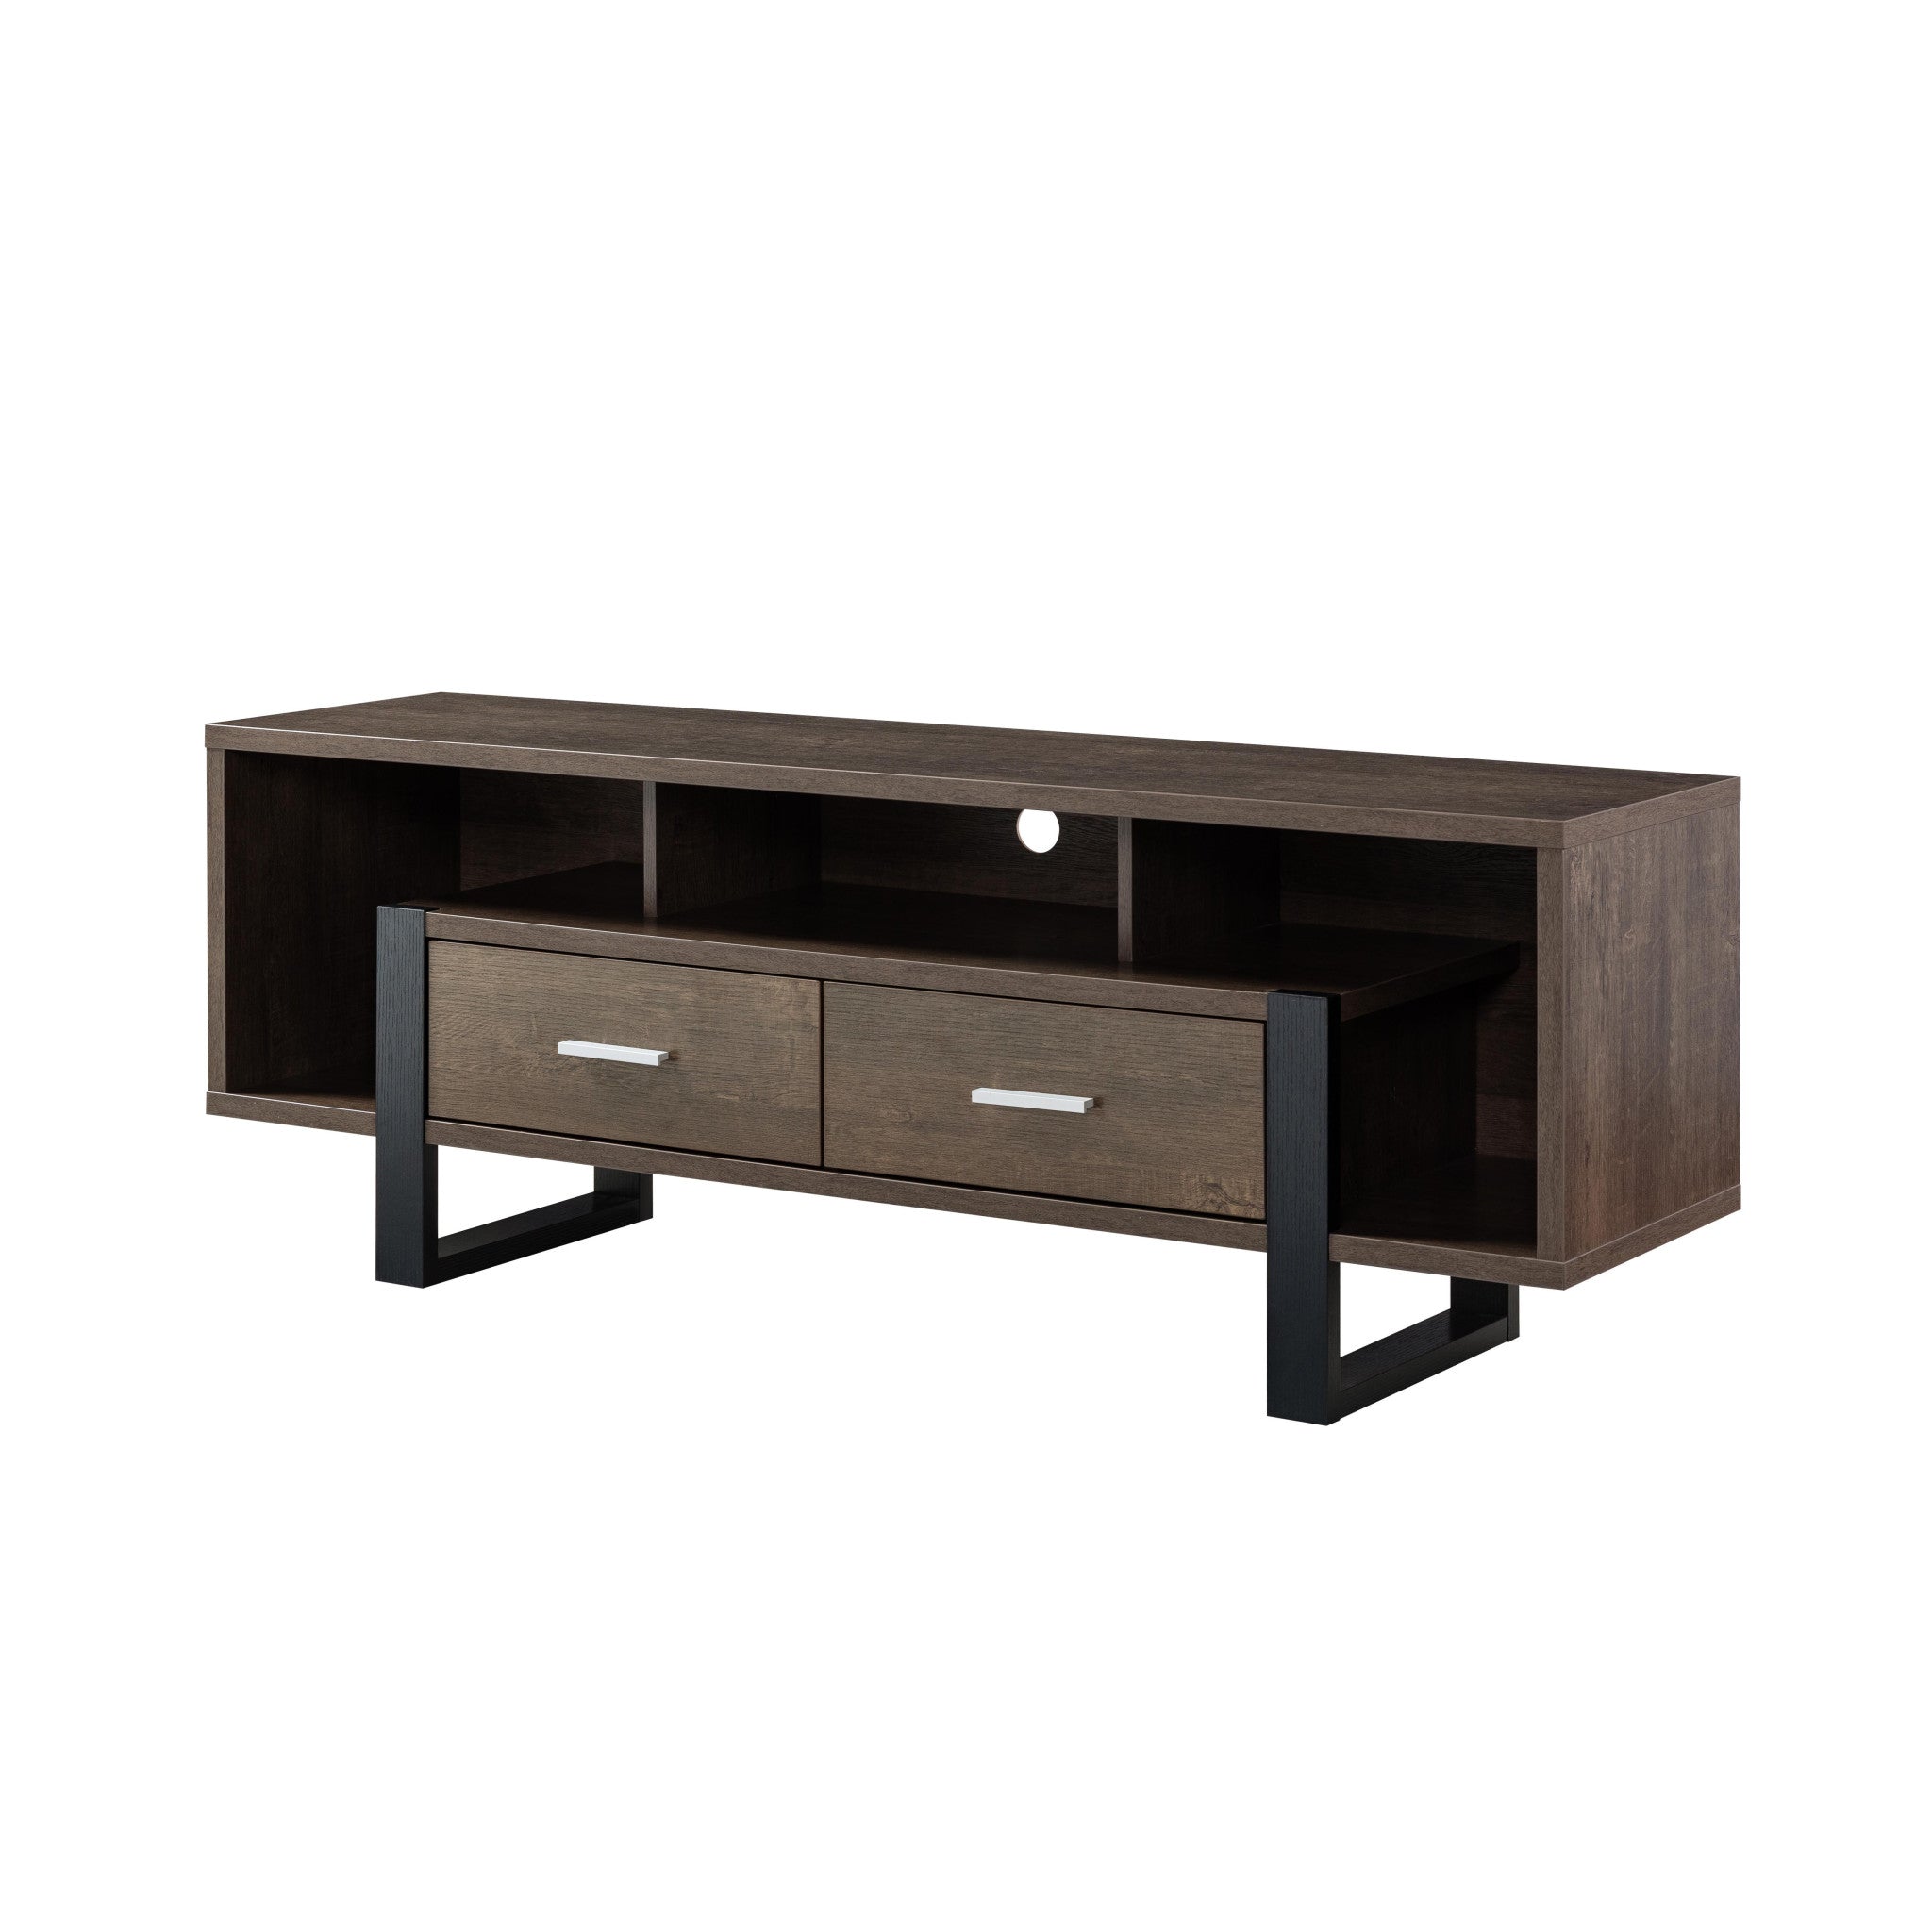 60" Walnut Oak And Black Manufactured Wood Cabinet Enclosed Storage TV Stand